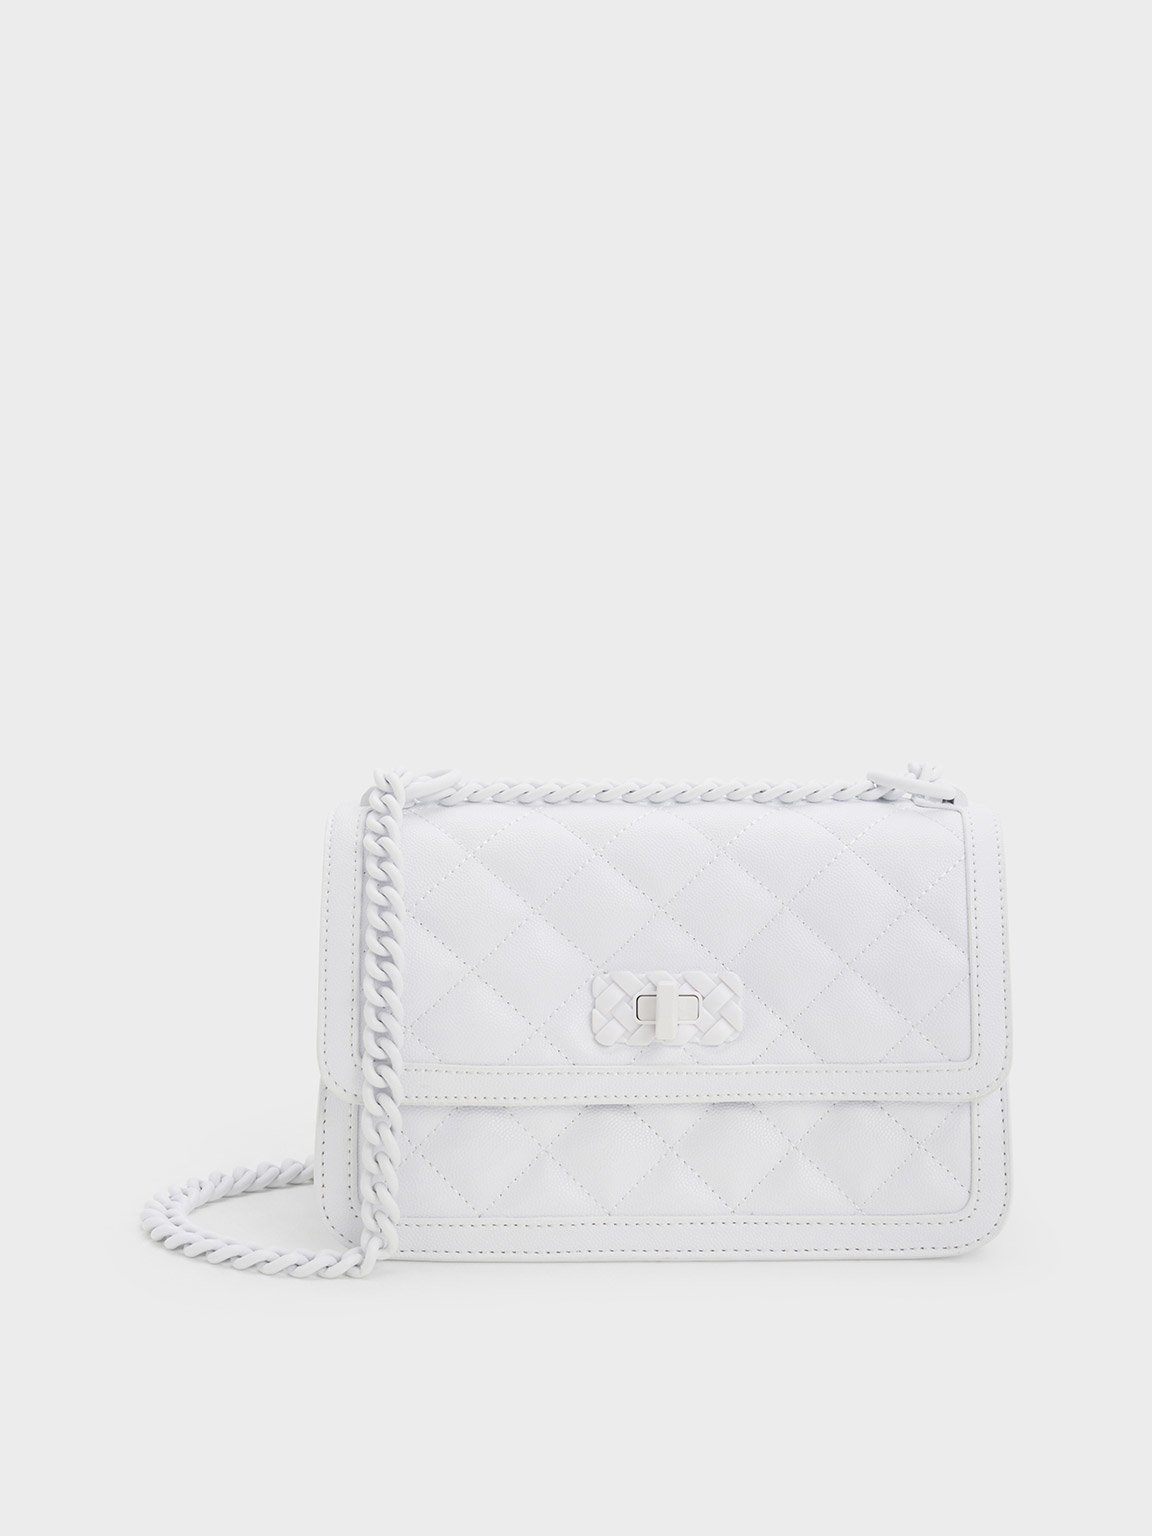 Charles & Keith Micaela Quilted Chain Bag In White